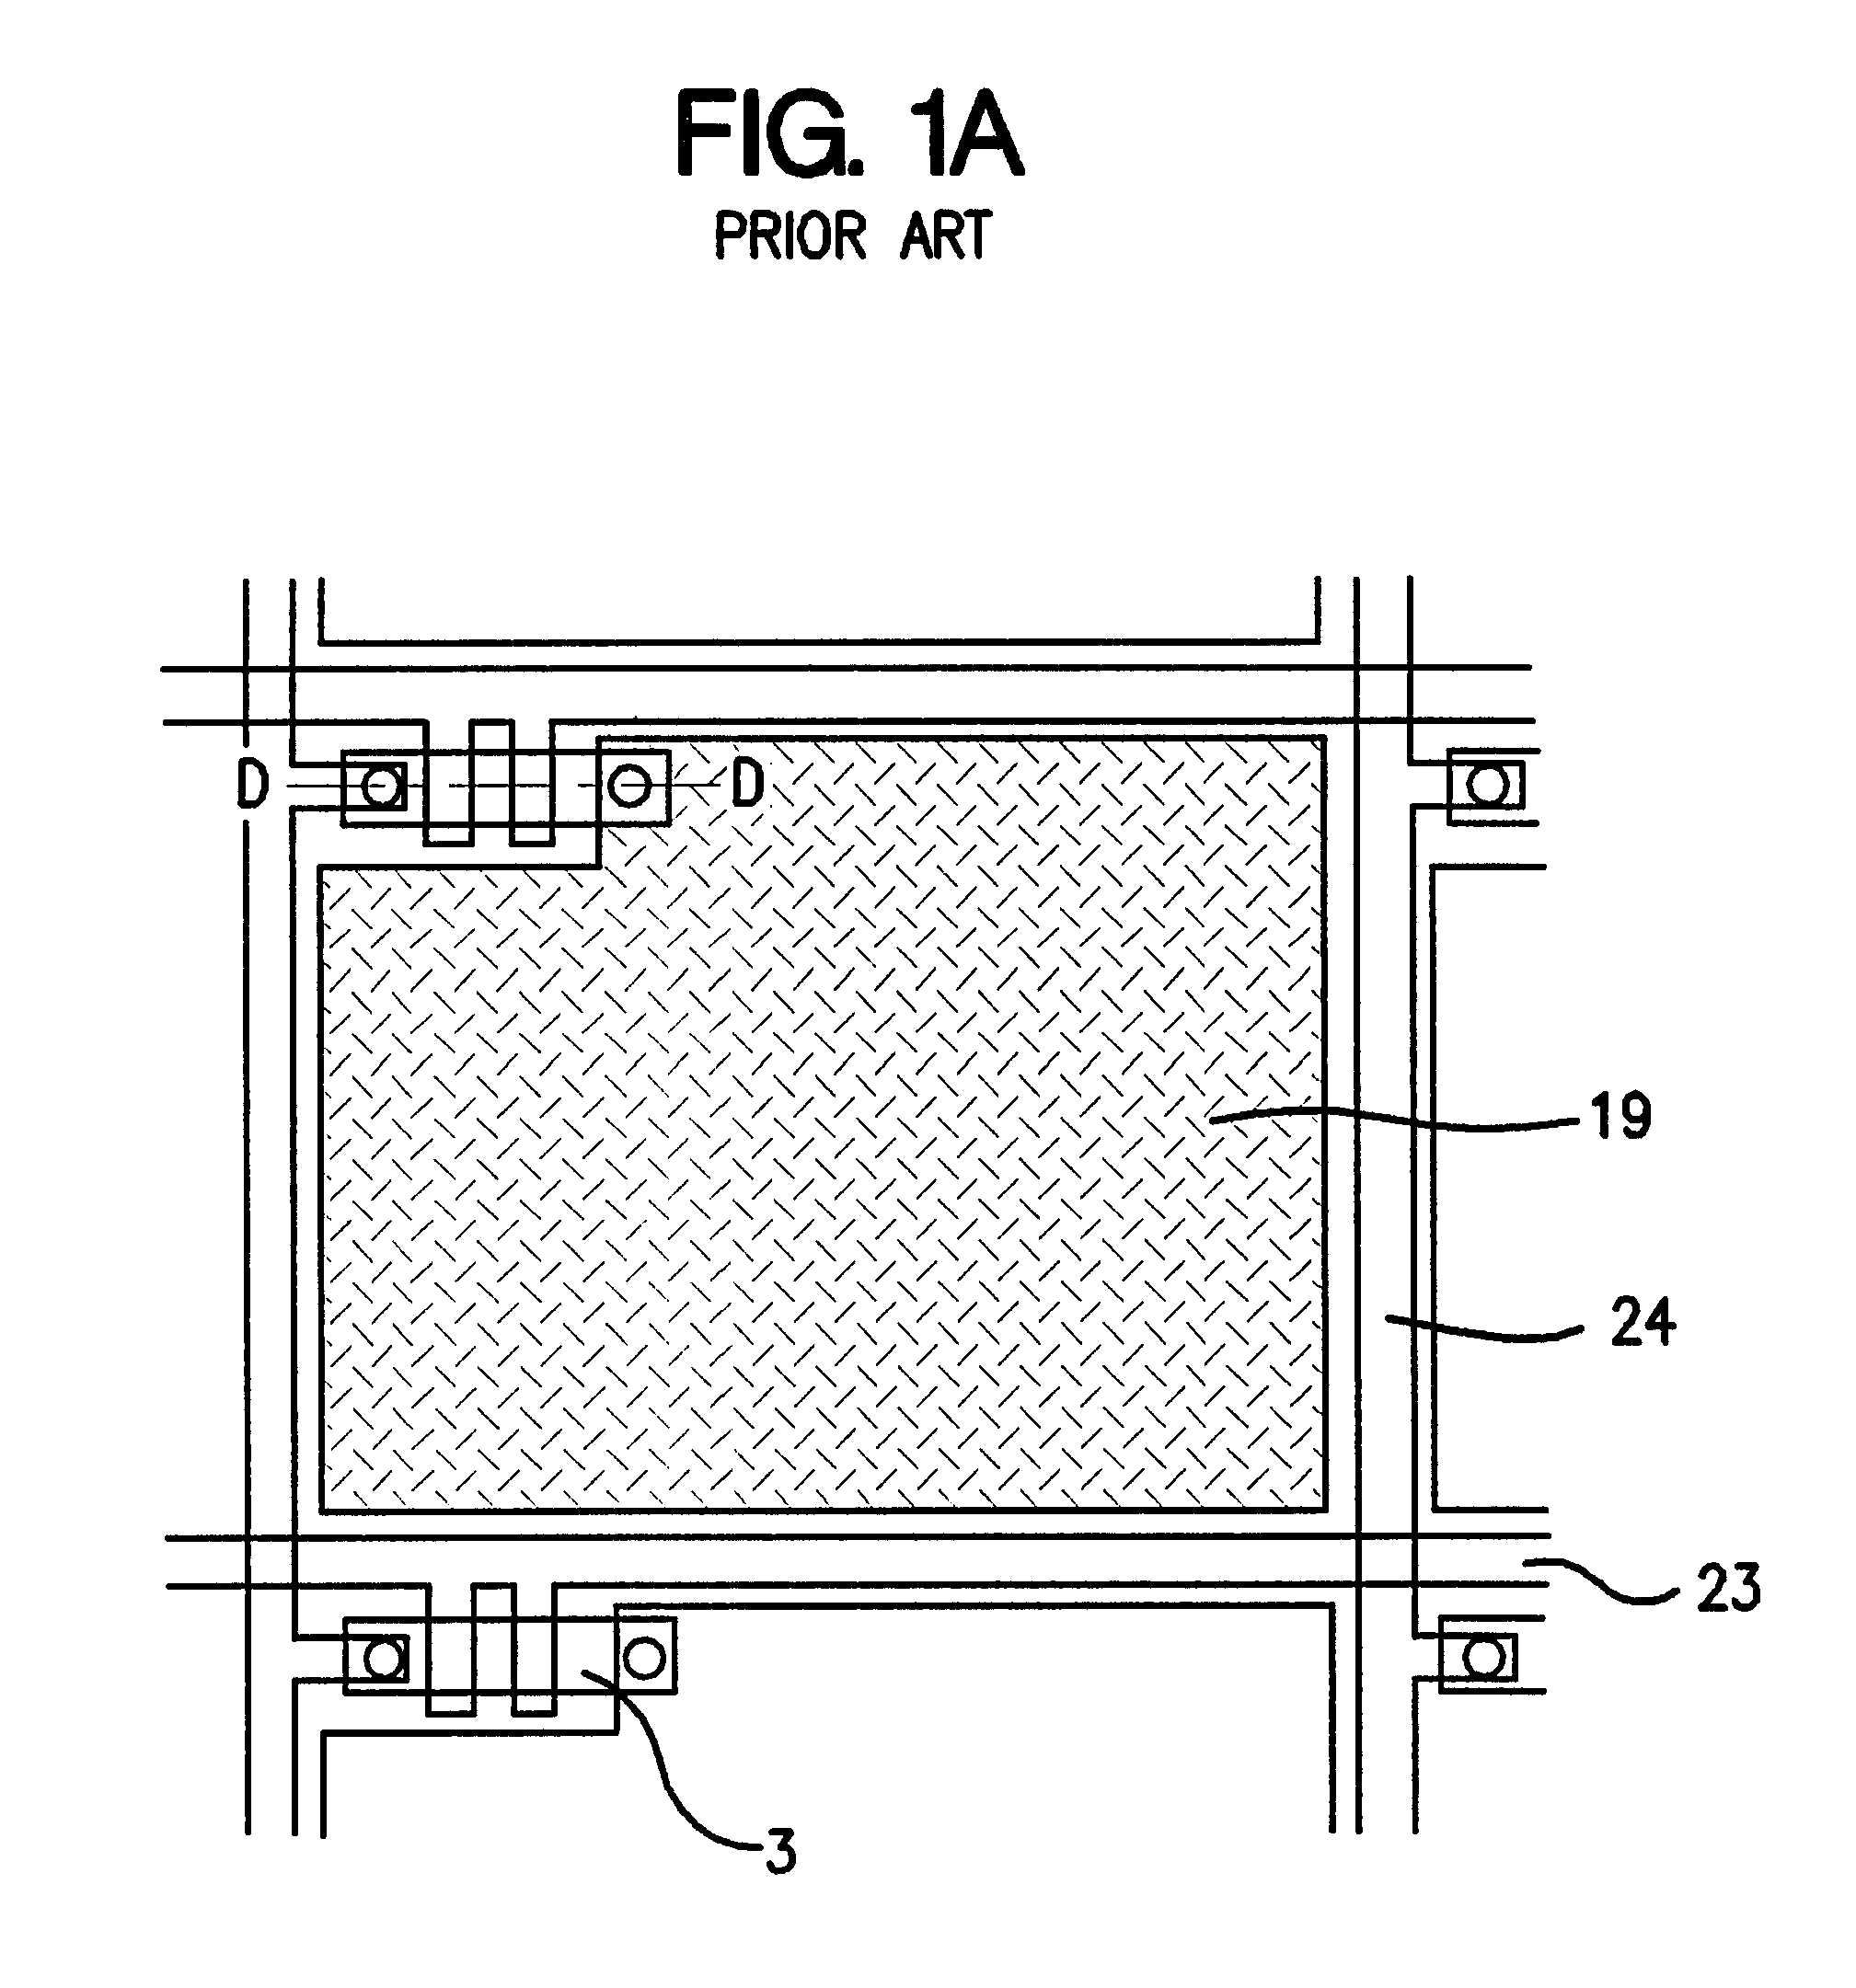 Active matrix organic EL display device and method of forming the same